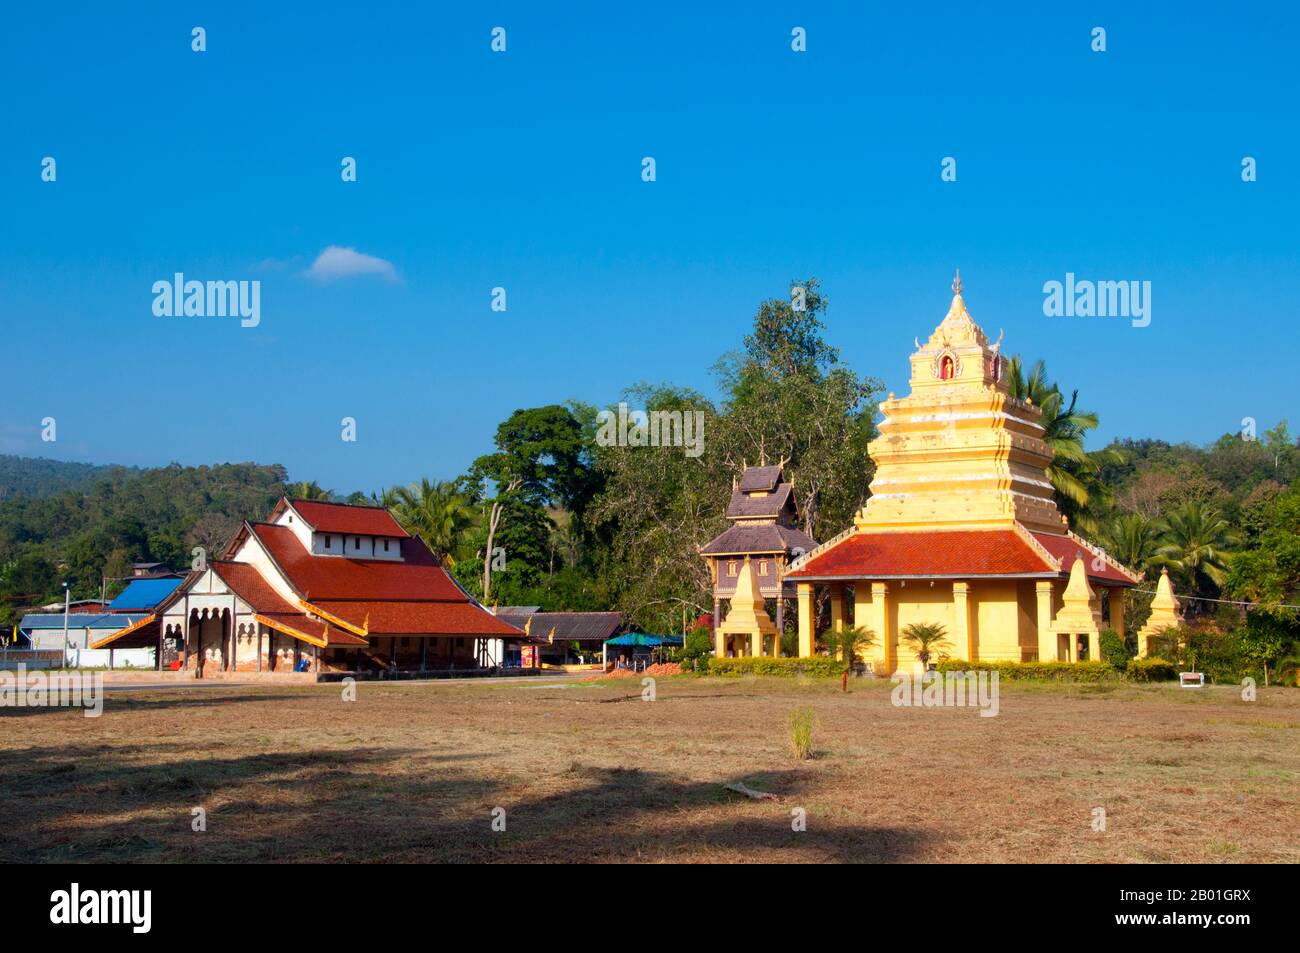 Thailand: Ancient viharn and chedi at Wat Si Pho Chai Na Phung, Na Haeo District, Loei Province.  Loei (Thai: เลย) Province is located in Thailand's upper North-East. Neighboring provinces are (from east clockwise) Nong Khai, Udon Thani, Nongbua Lamphu, Khon Kaen, Phetchabun, Phitsanulok. In the north it borders Xaignabouli and Vientiane Provinces of Laos.  The province is covered with low mountains, while the capital Loei is located in a fertile basin. The Loei River, which flows through the province, is a tributary of the Mekong. Stock Photo